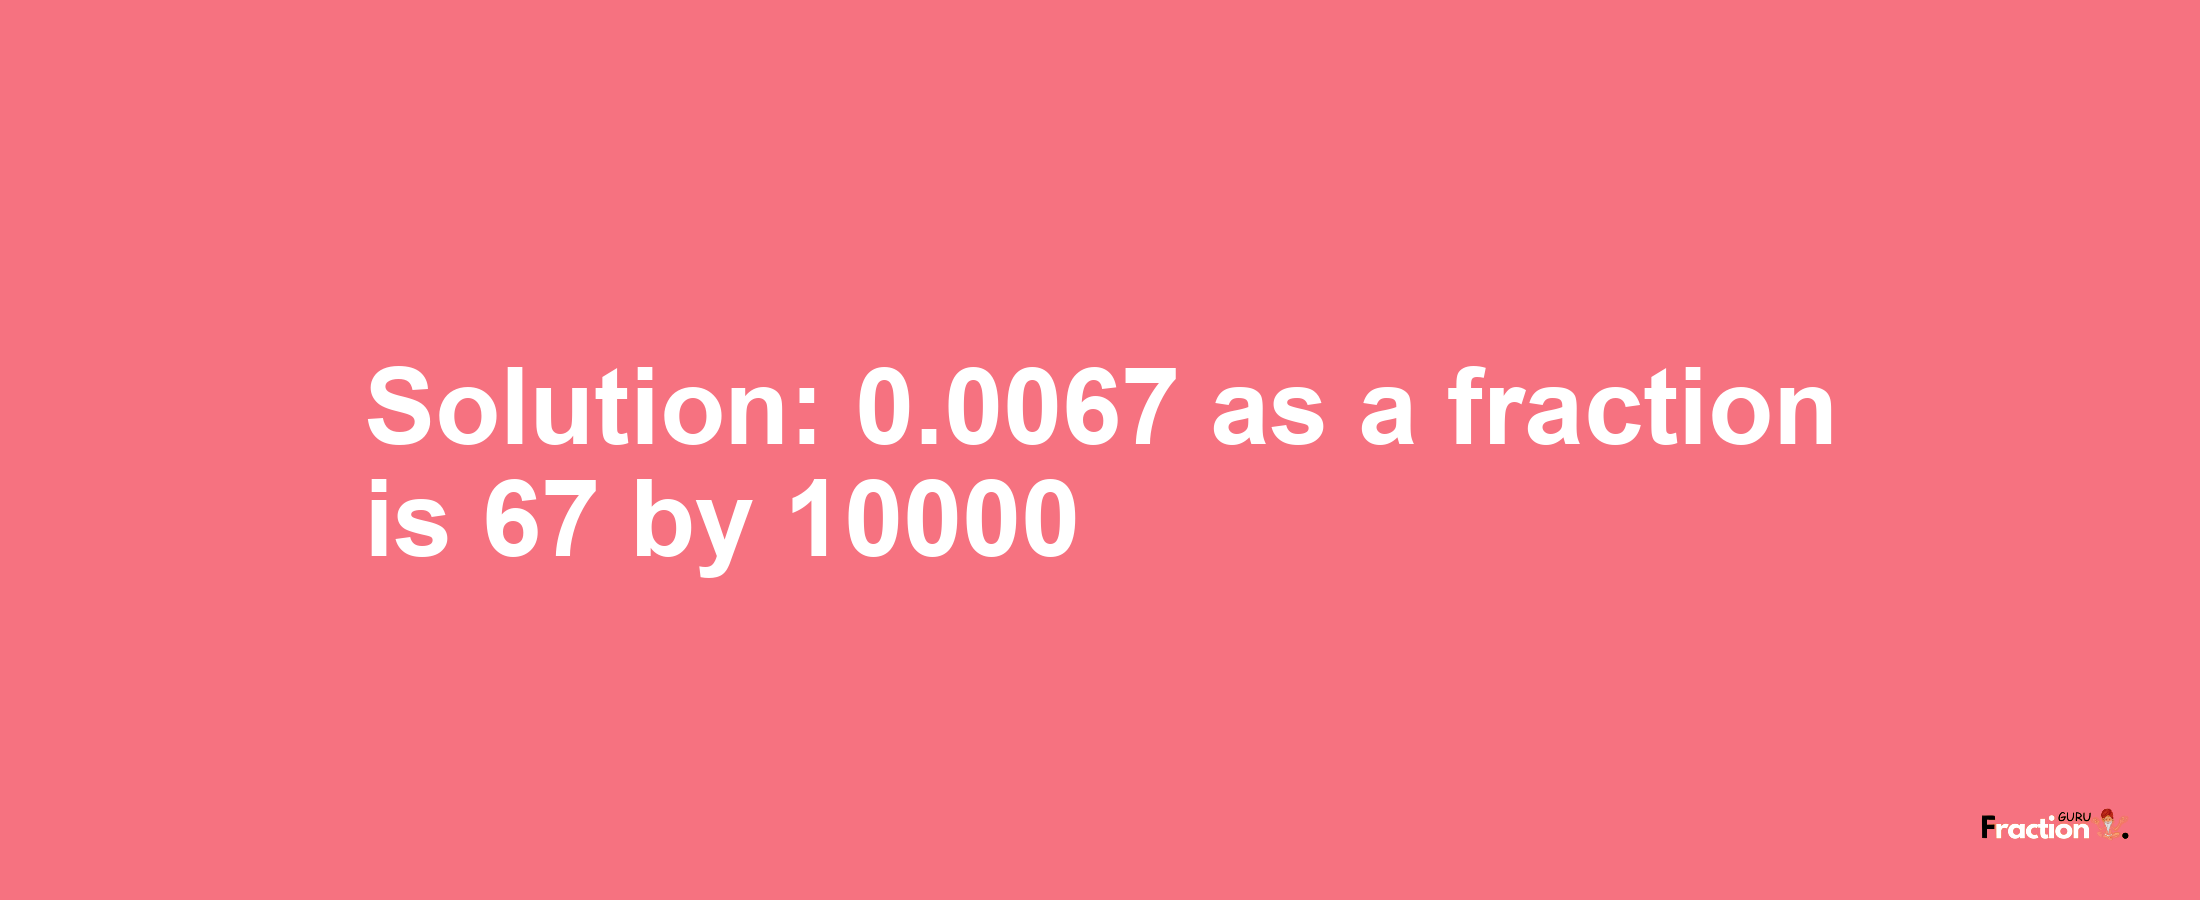 Solution:0.0067 as a fraction is 67/10000